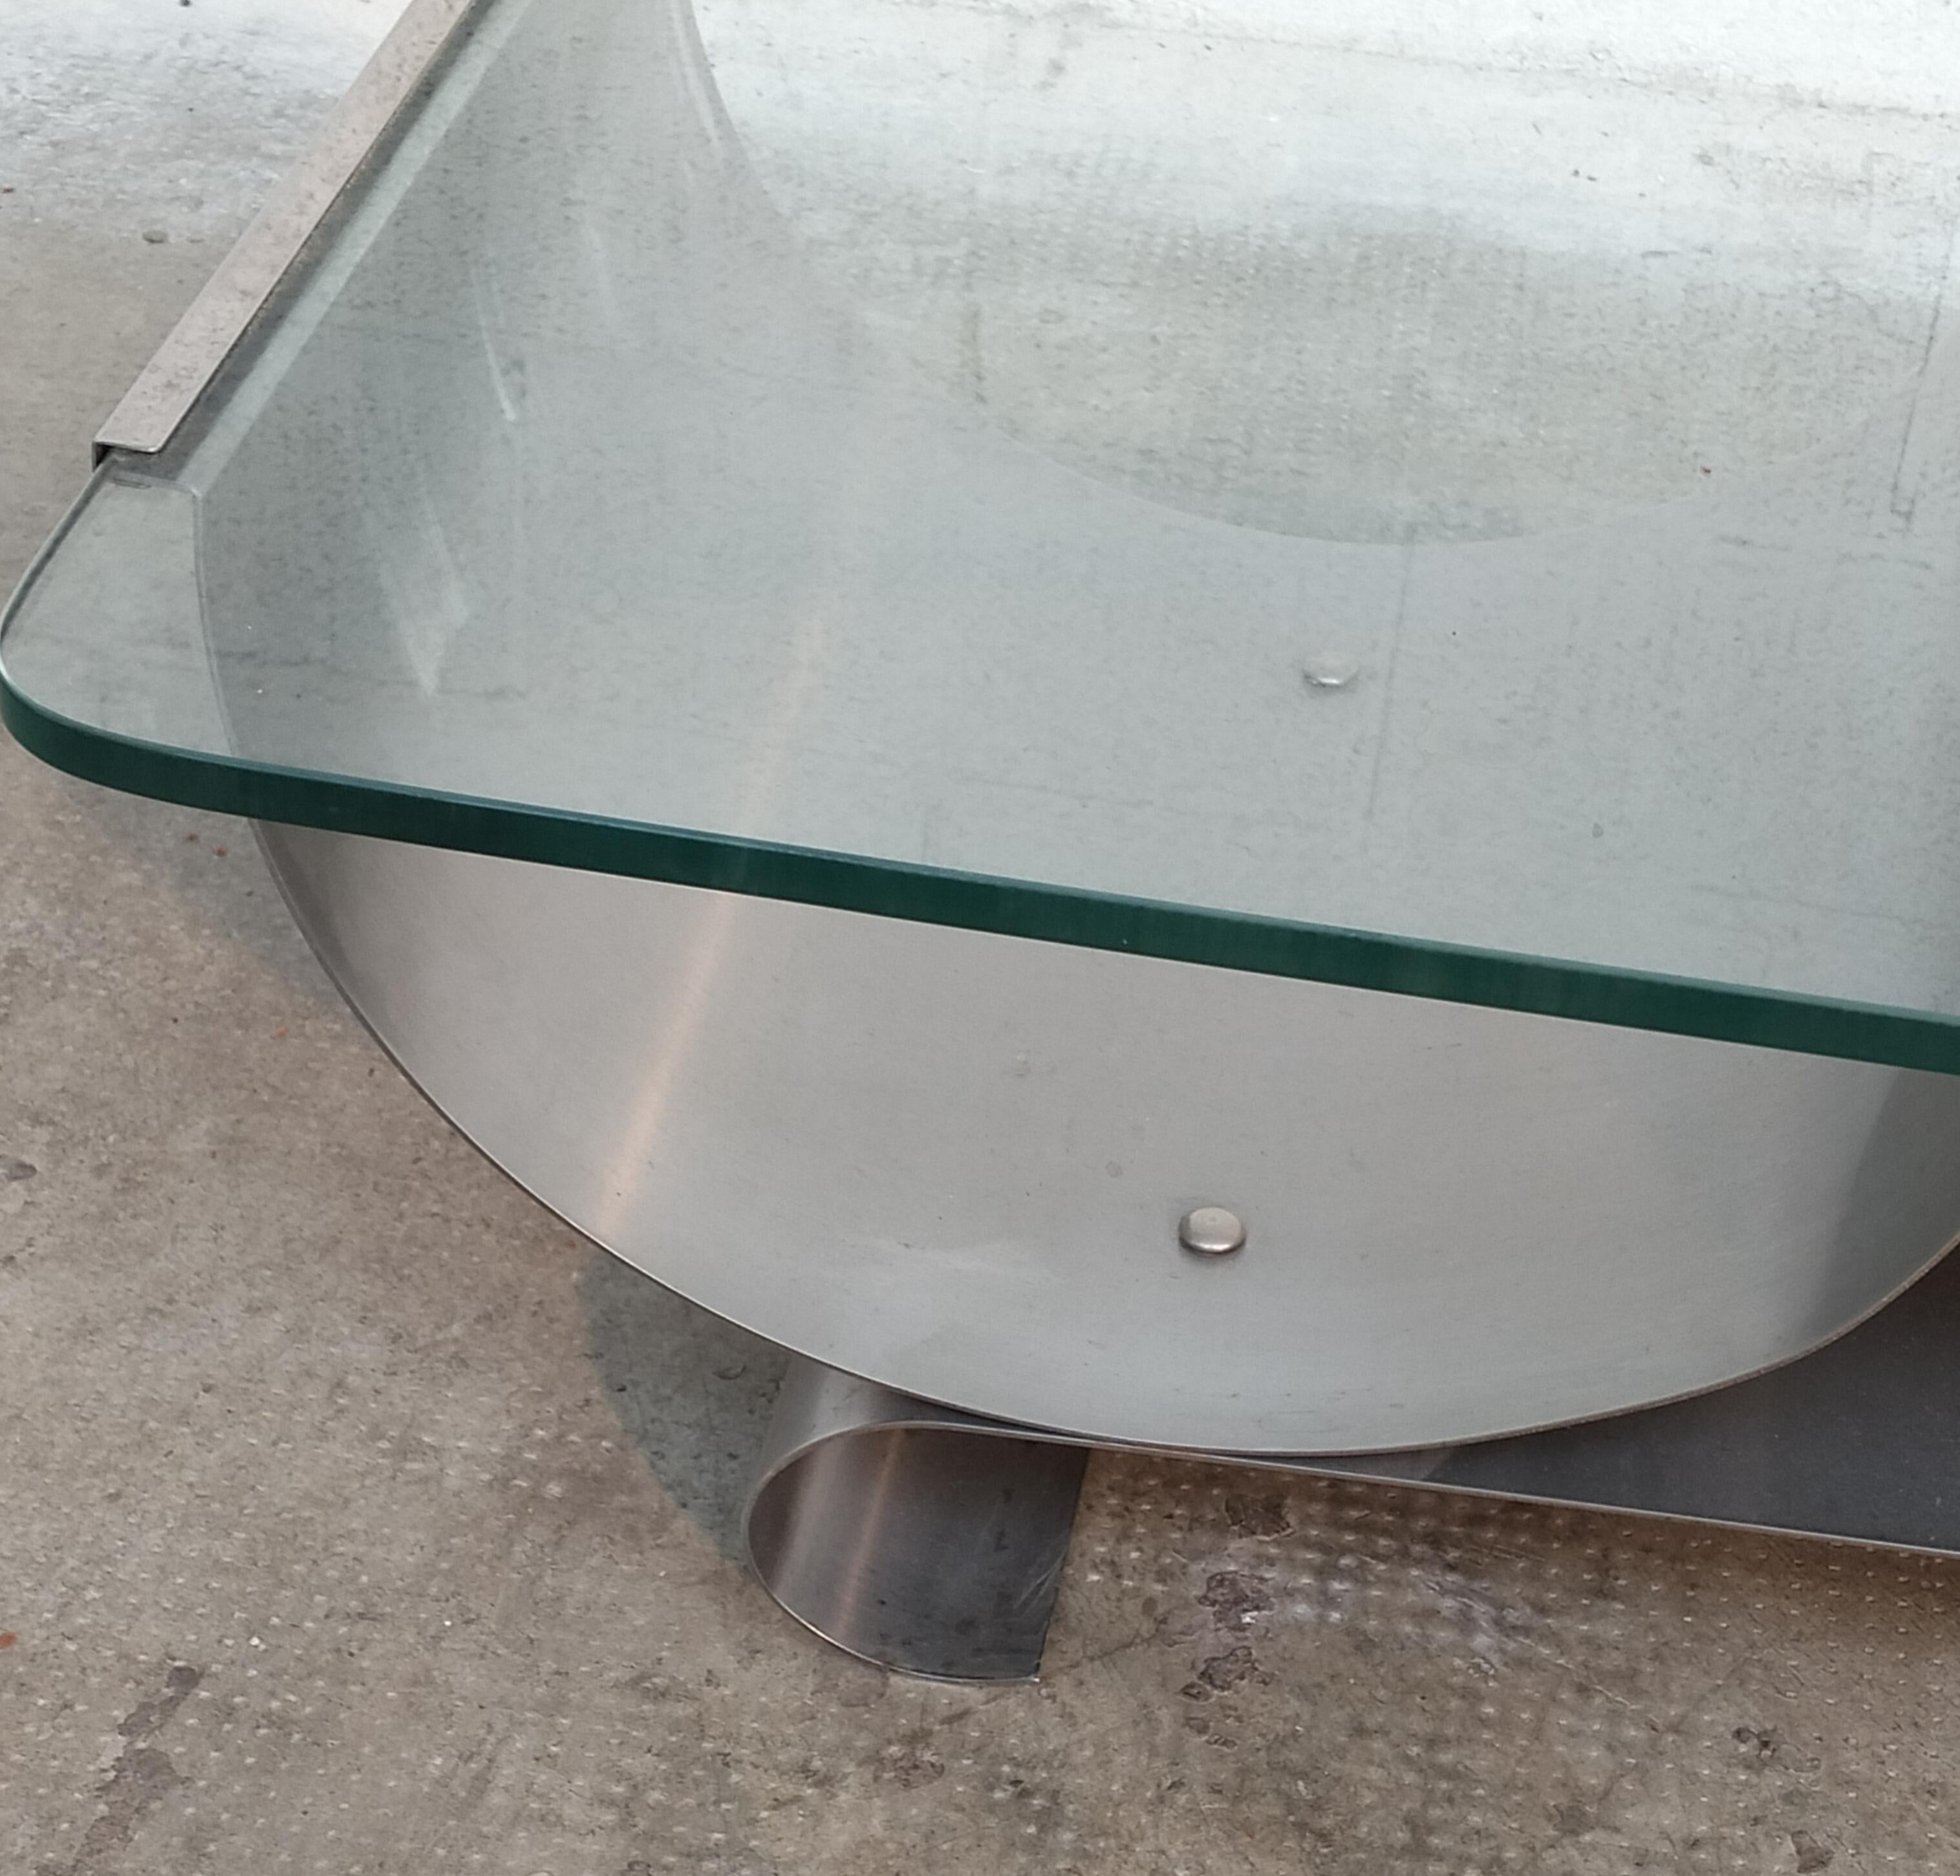 Stainless Steel and Glass Coffee Table by Francois Monnet for Kappa 70s For Sale 2